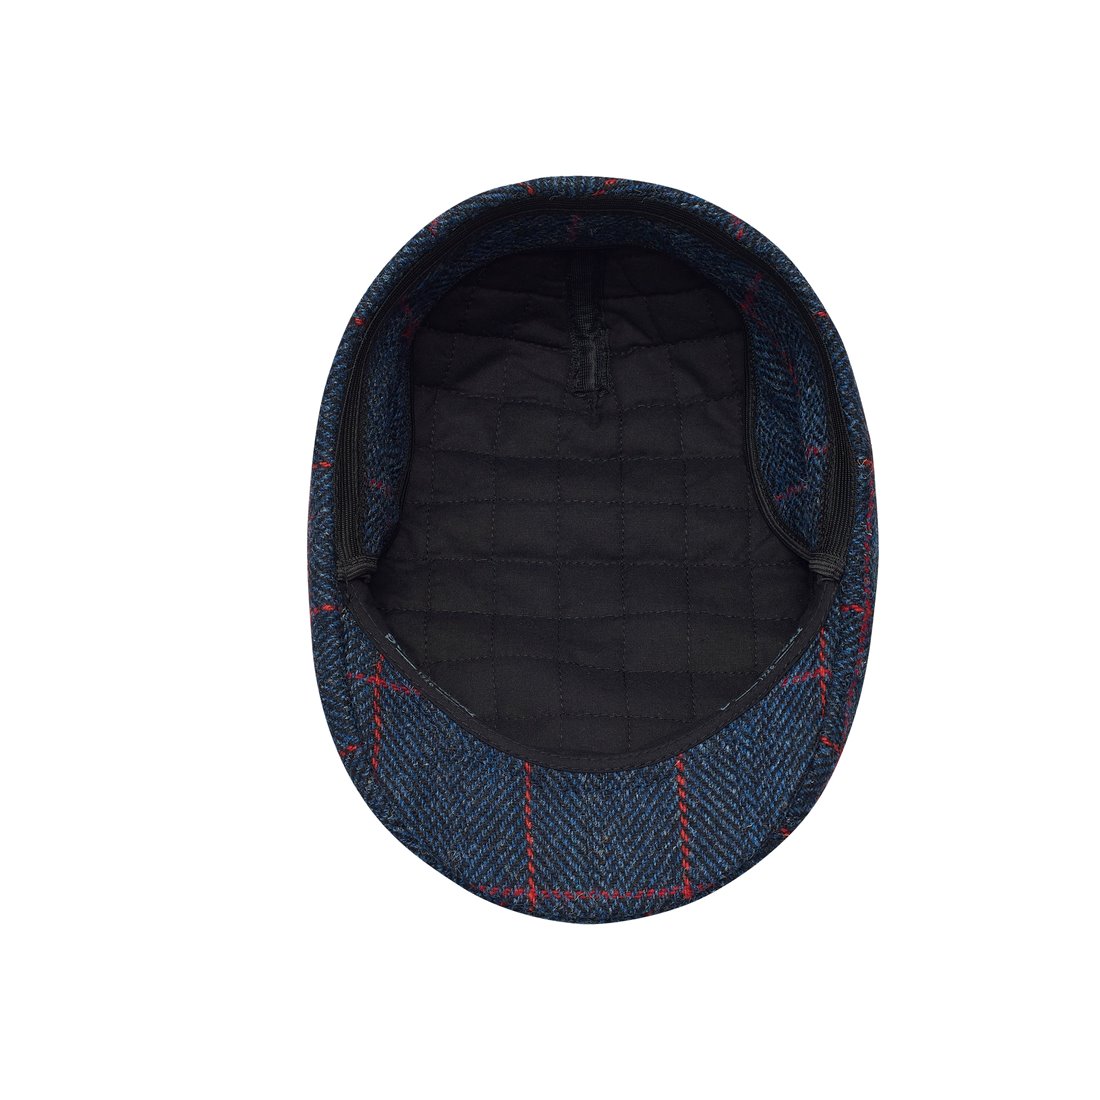 Norte - winter flat cap with foldable earflap made of wool, with padded cotton  lining